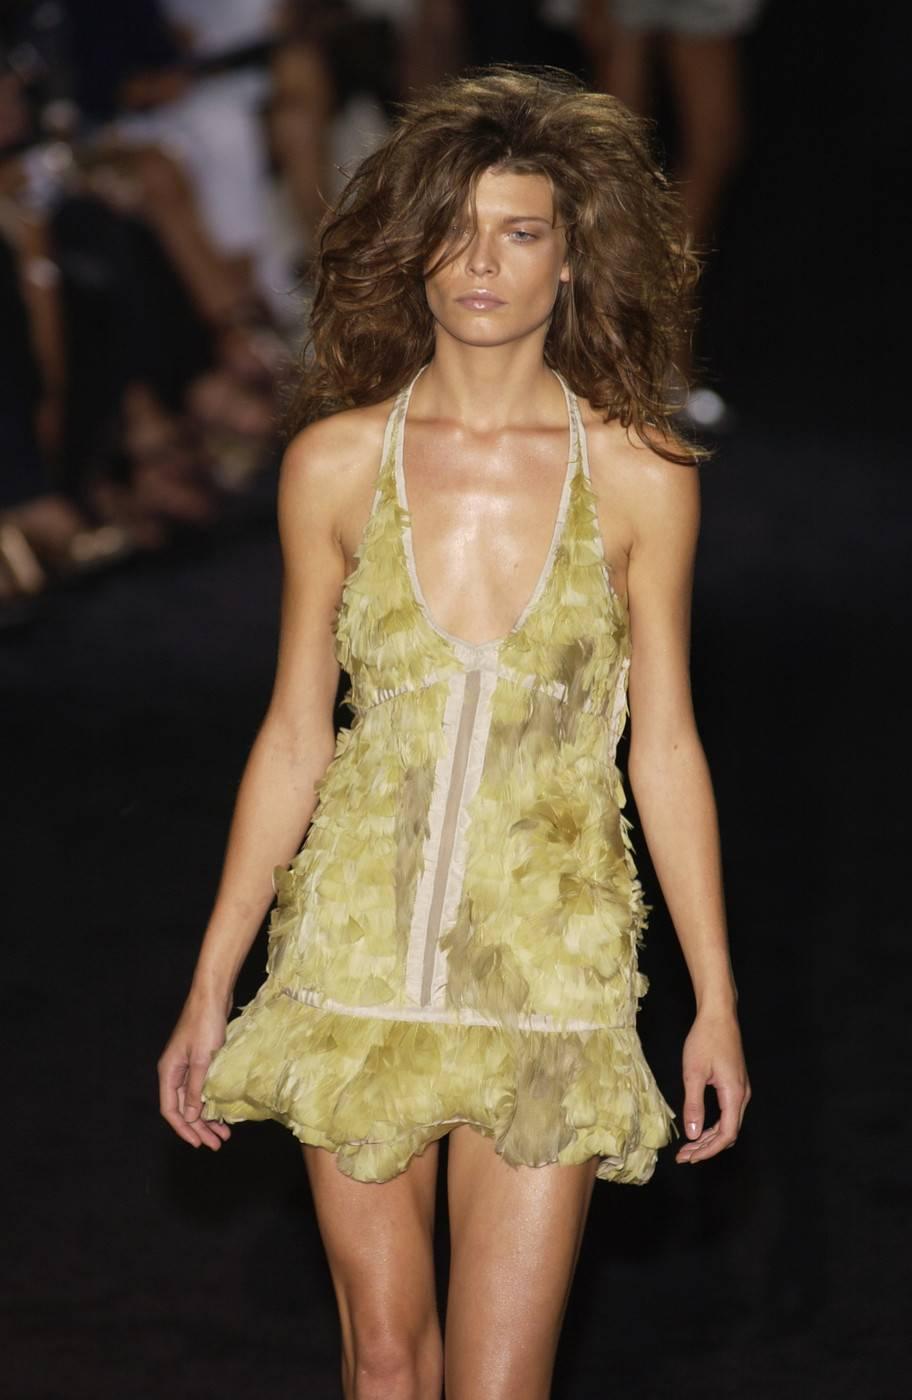 Beige Tom For for Gucci Spring-Summer 2003 pale pink feather mini dress